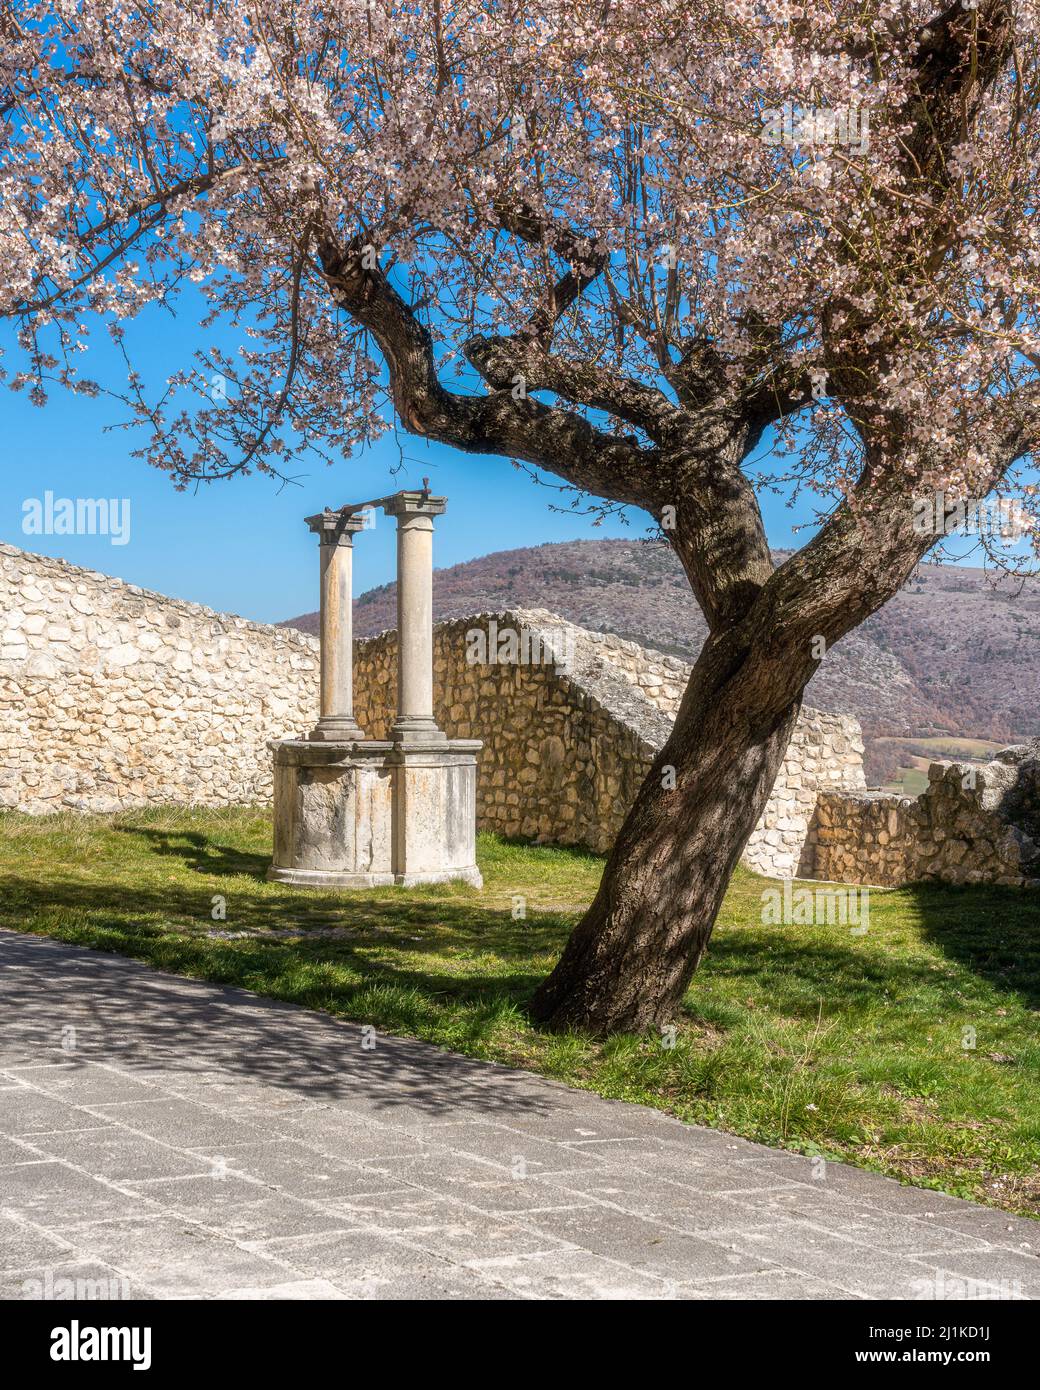 Navelli in spring season, beautiful village in the province of L'Aquila, in the Abruzzo region of central Italy. Stock Photo